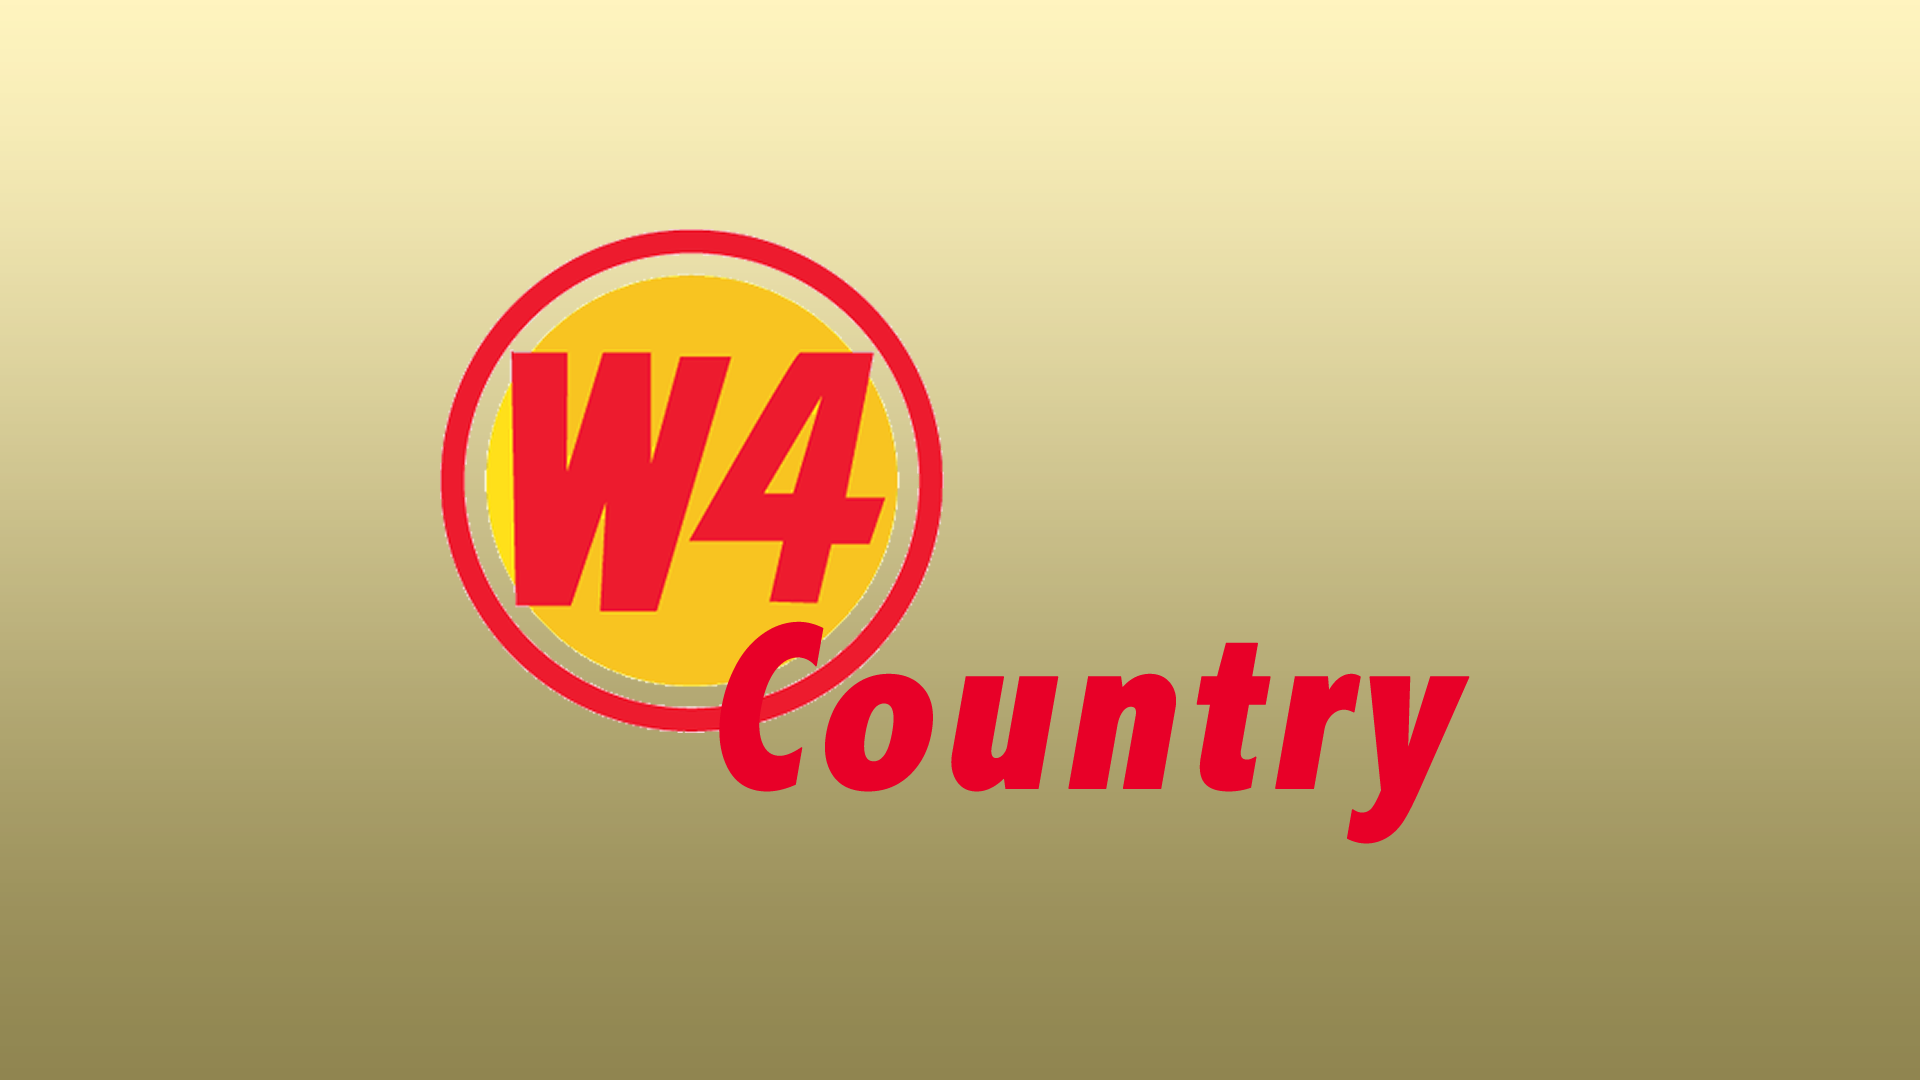 W4 COUNTRY